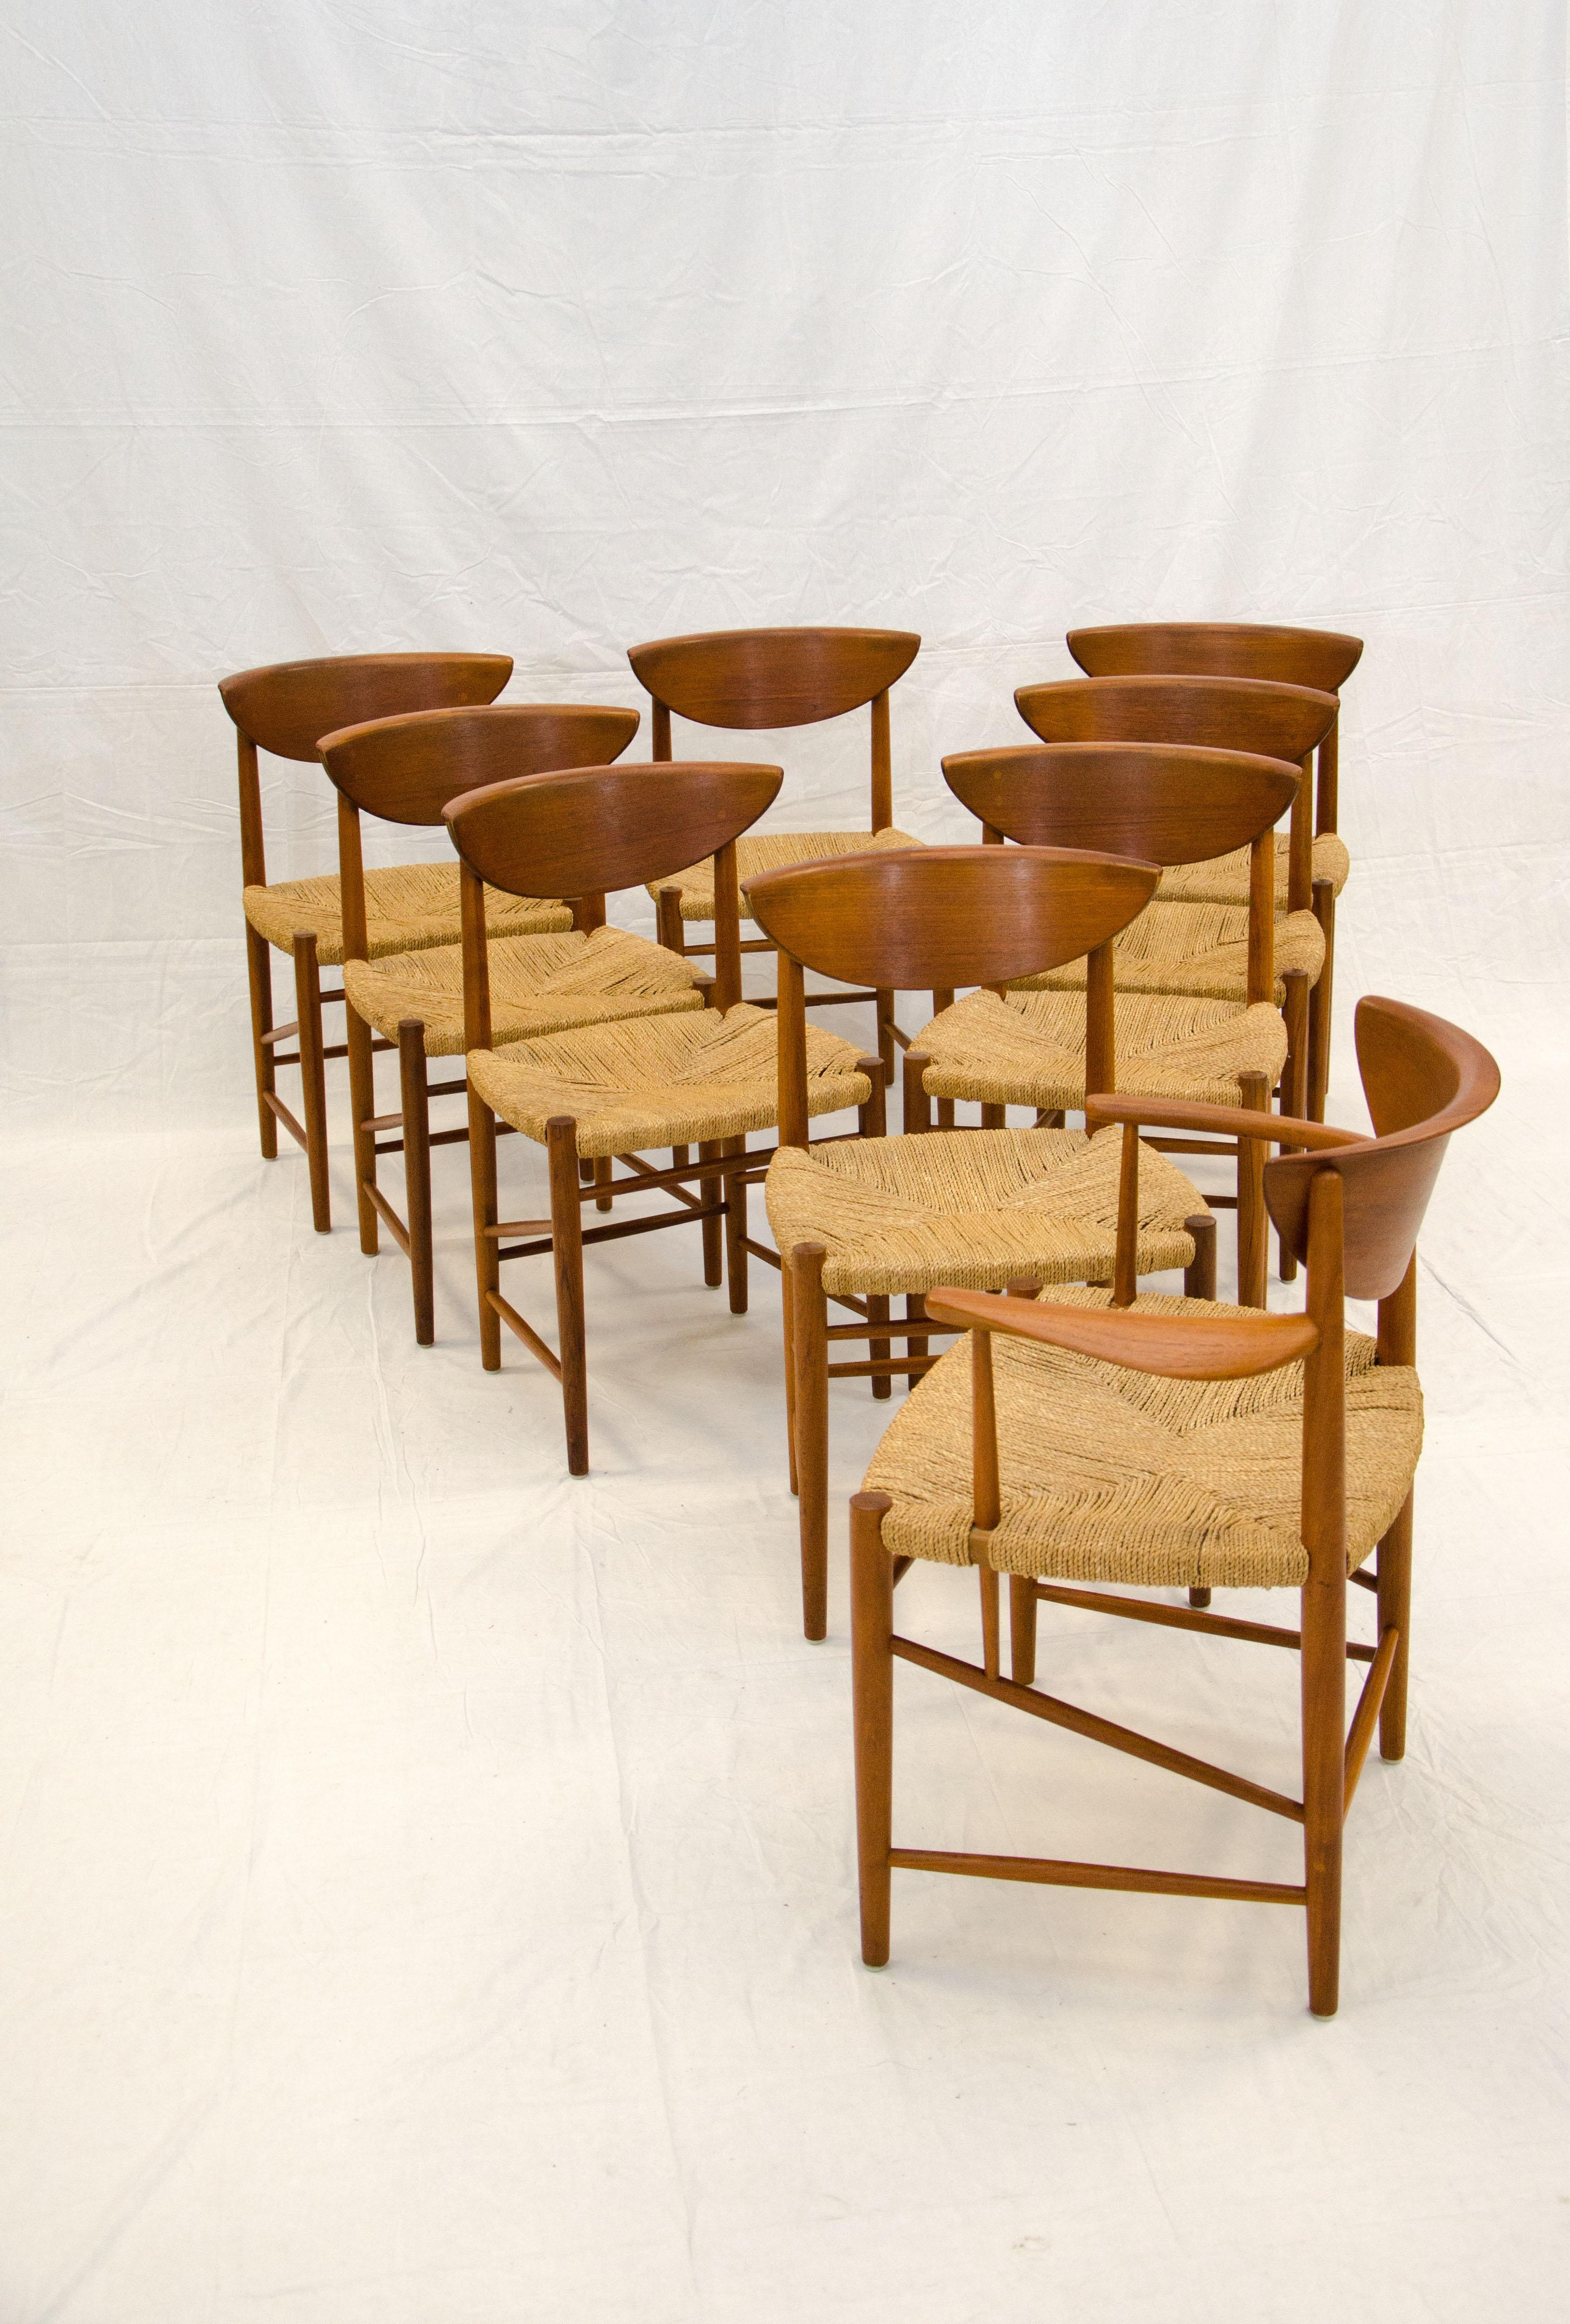 A beautiful set of Danish teak dining chairs by renowned designer Peter Hvidt manufactured by Soborg Mobler. A rare find in this excellent condition with original finish and original woven seagrass seats, without loose cords or staining. The arms